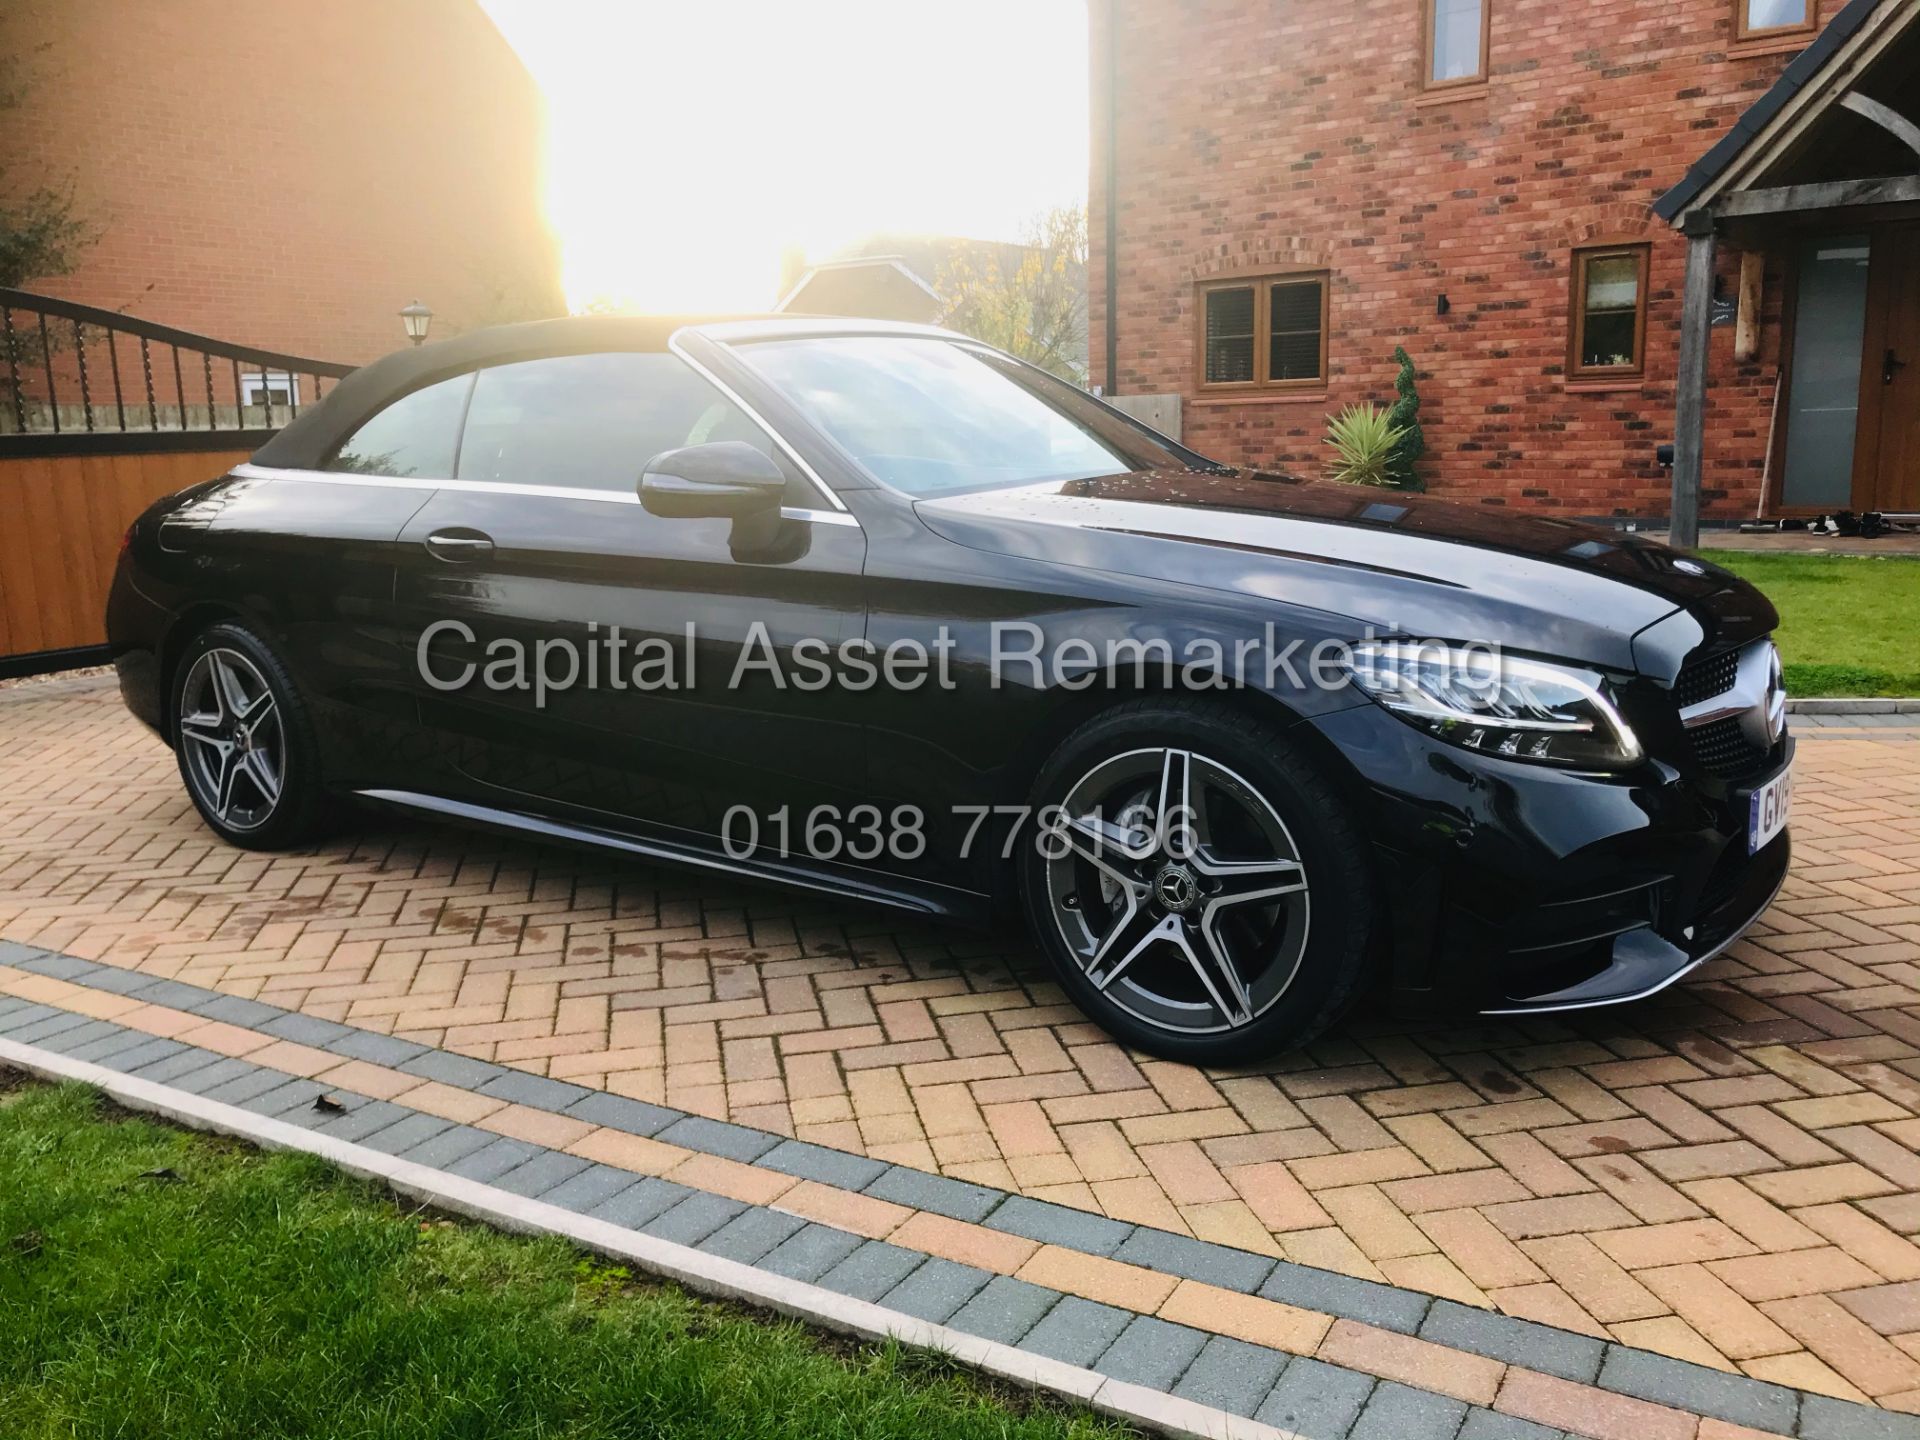 On Sale MERCEDES-BENZ C220d *AMG LINE -CABRIOLET* (2019) '9G TRONIC AUTO - LEATHER - SAT NAV' - Image 14 of 32